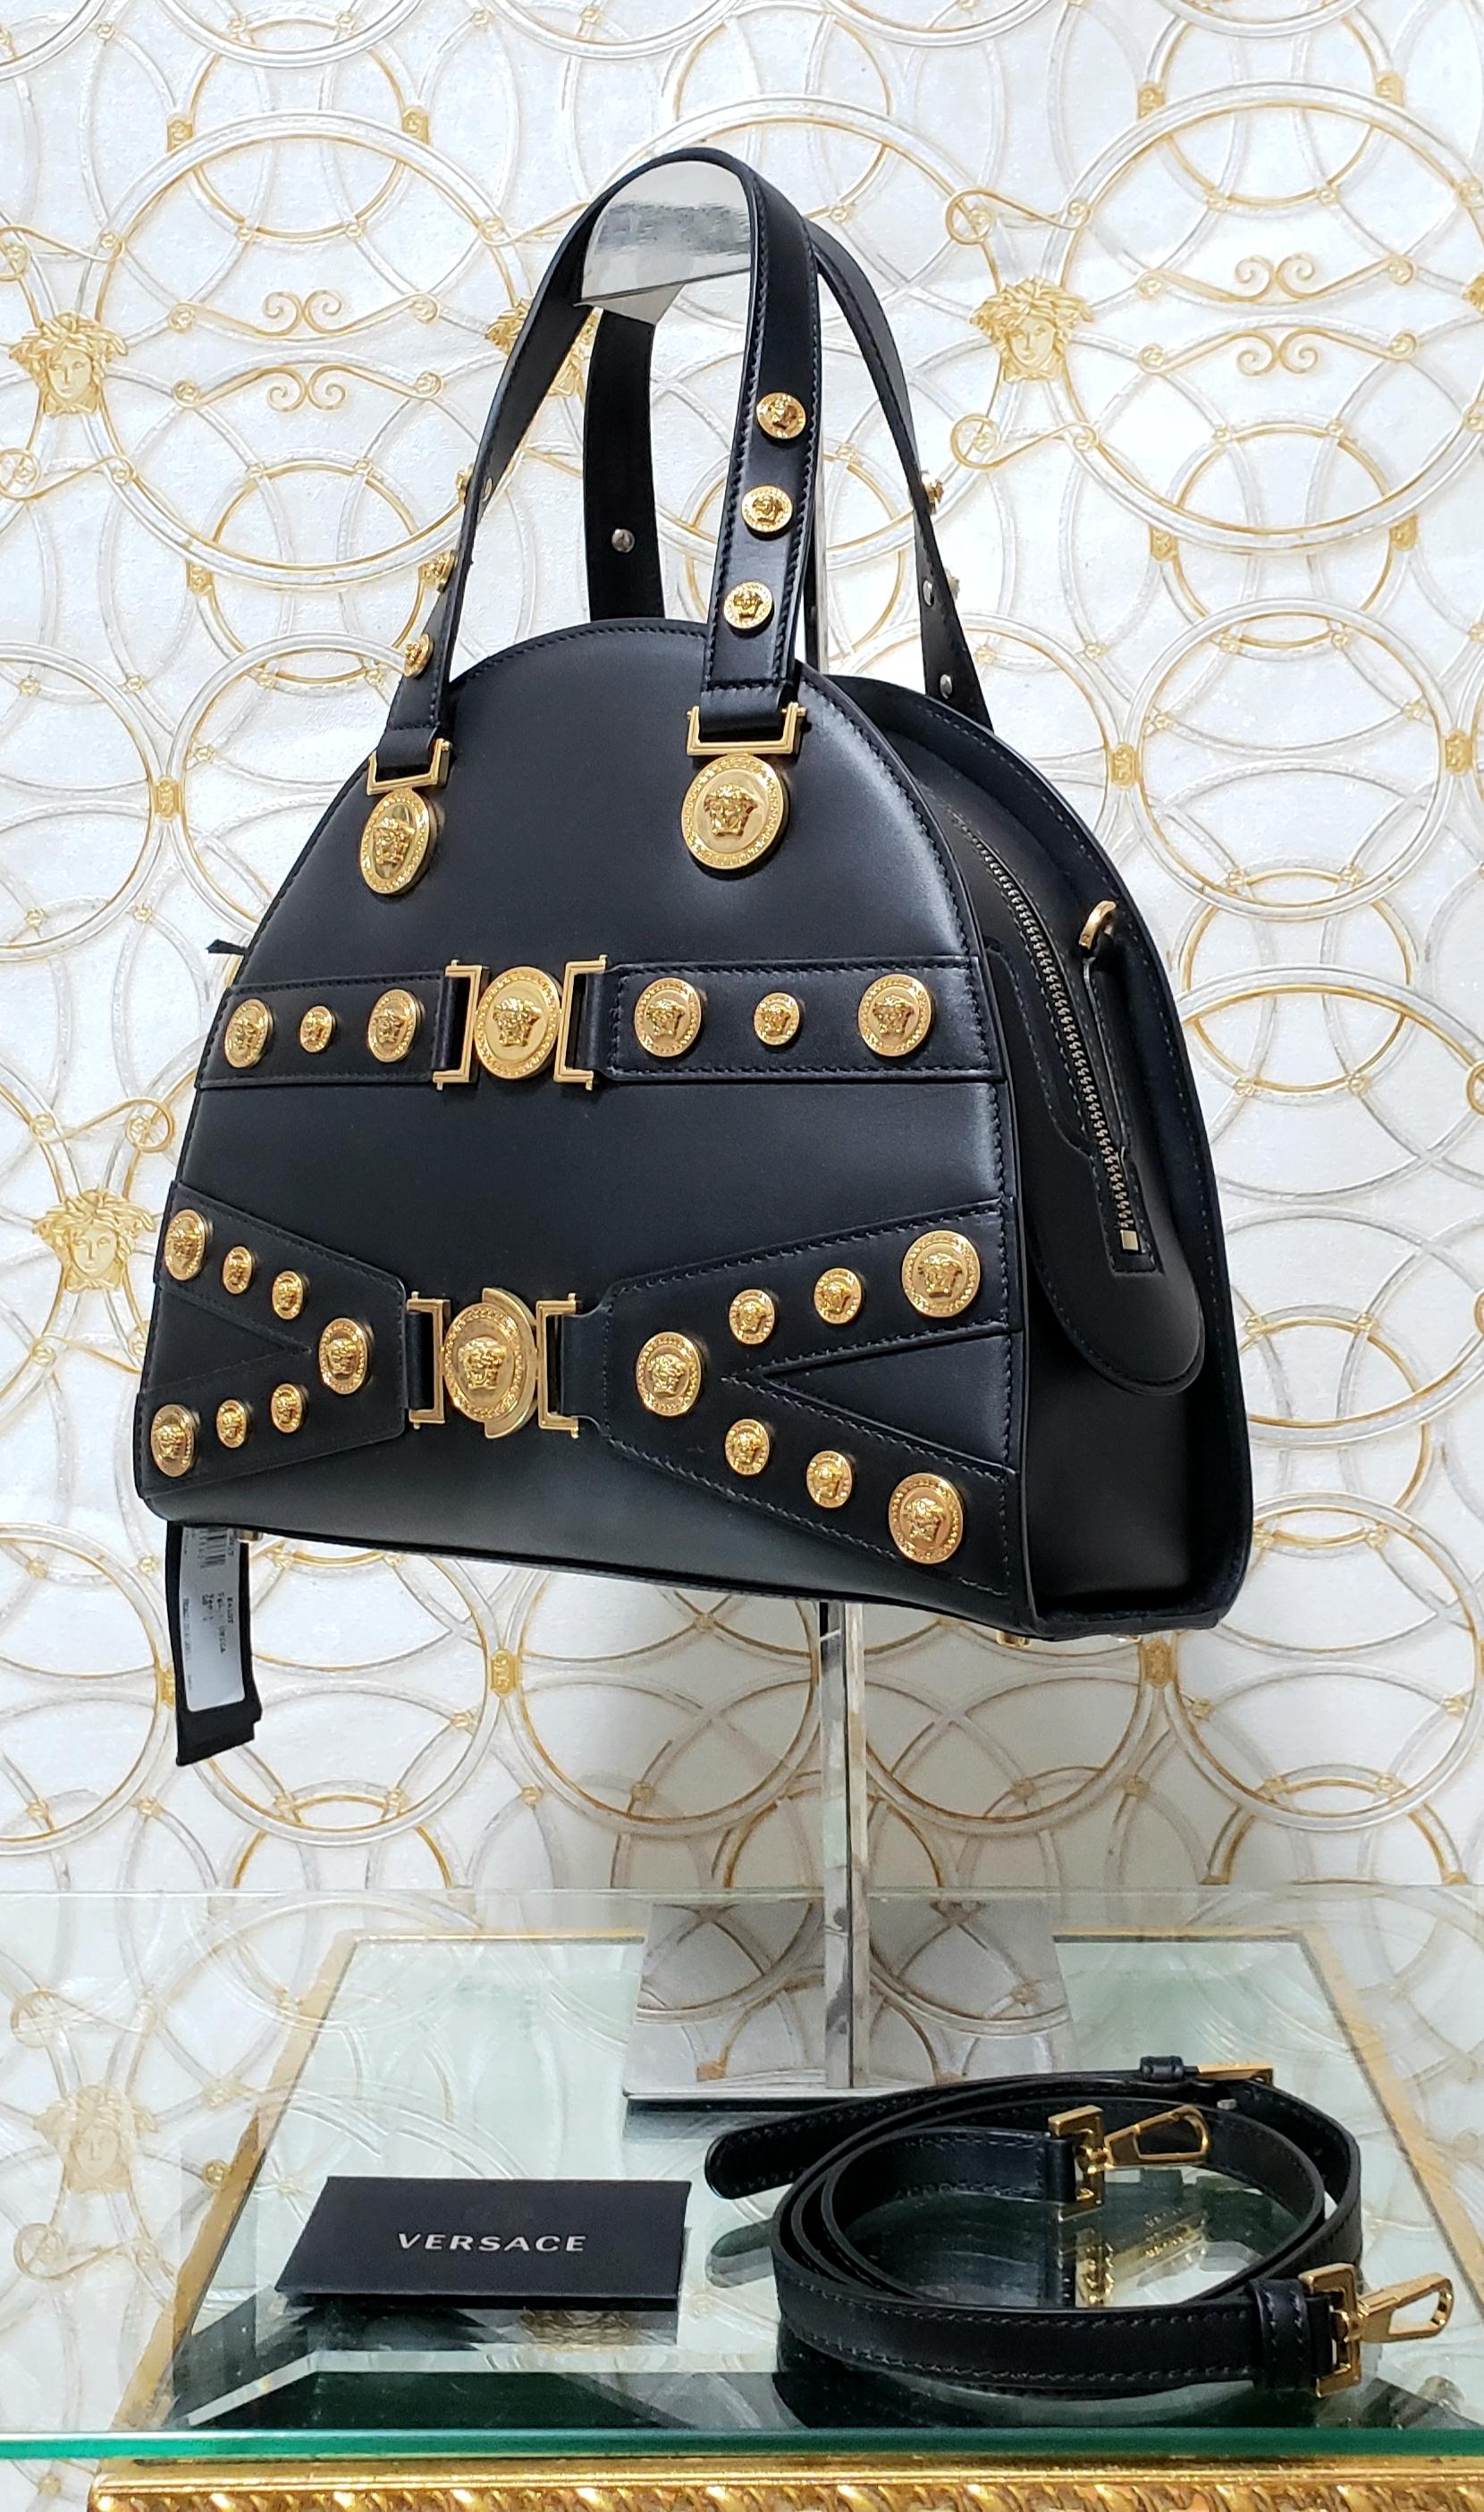 VERSACE 


GIANNI VERSACE TRIBUTE BLACK LEATHER MEDALLION BAG



Versace is one of the most renowned Italian fashion labels. 

Its first boutique was opened in Milan in 1978 and the name Versace quickly became a synonym for luxury and refined